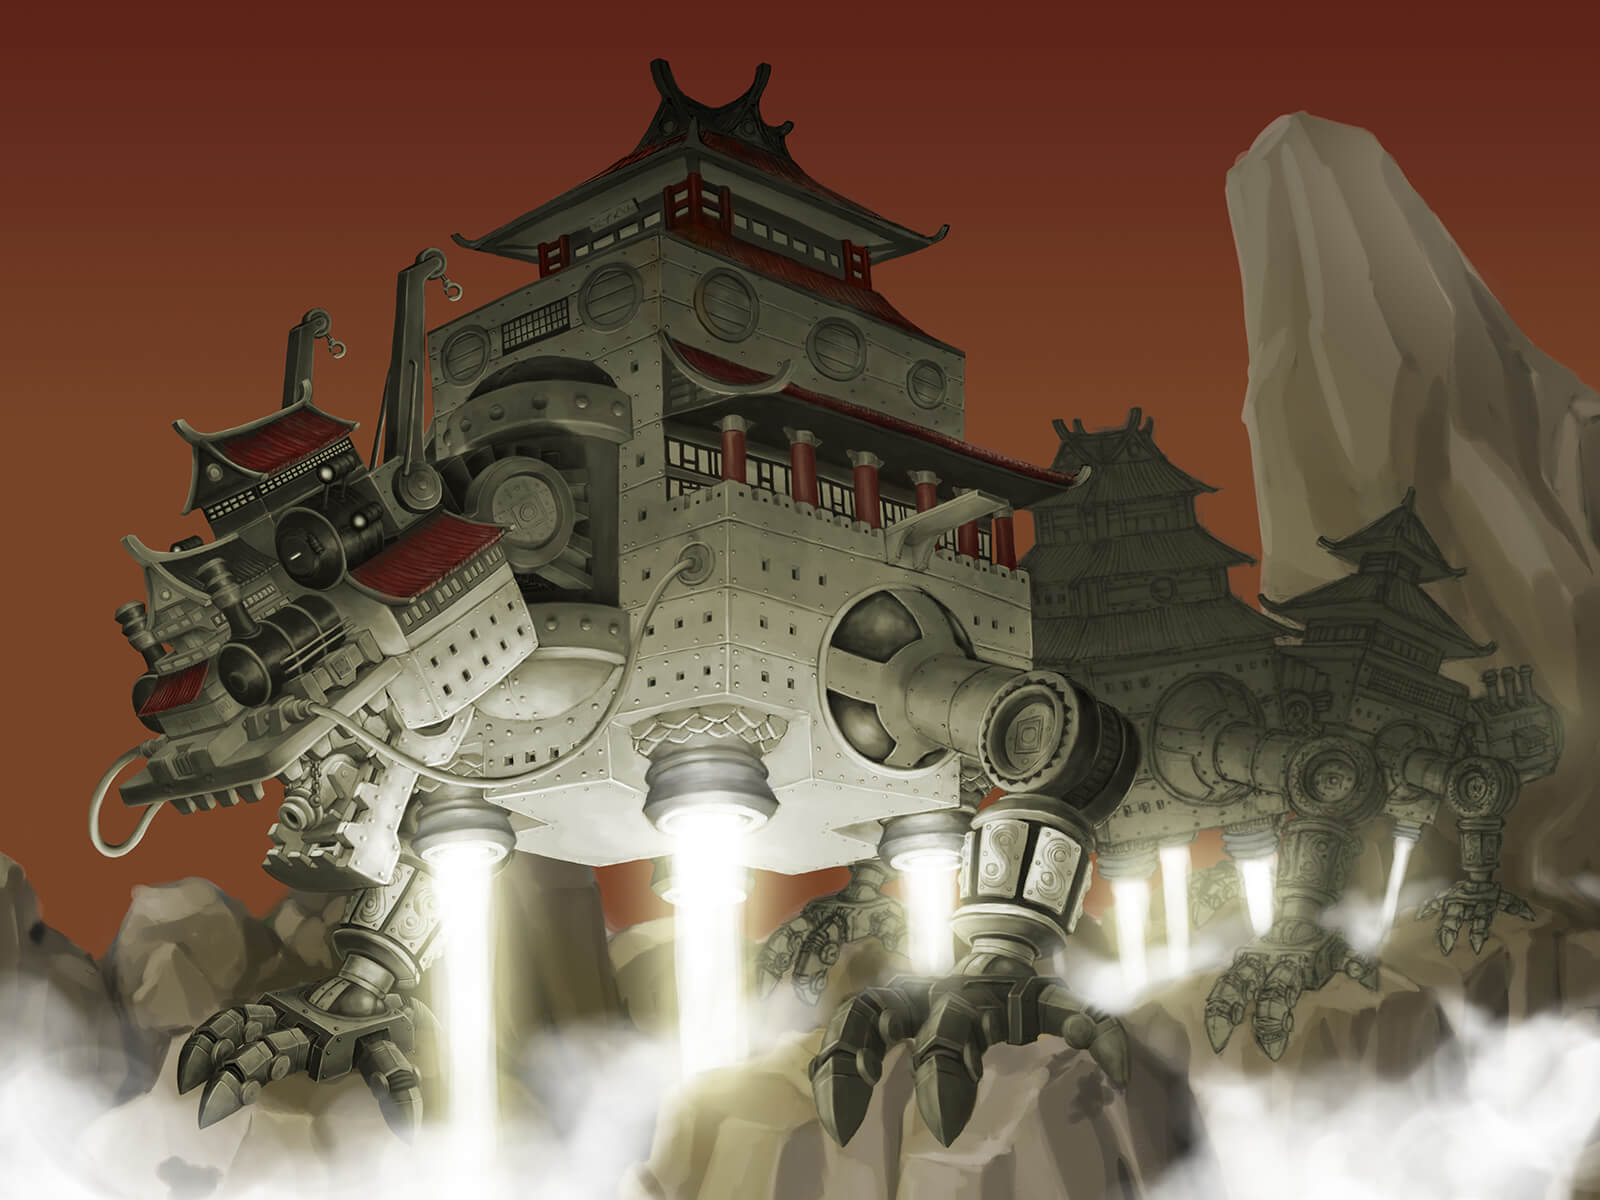 A massive steampunk-style metal dragon made up of interconnected pagoda-style fortresses crawls across a mountain range.